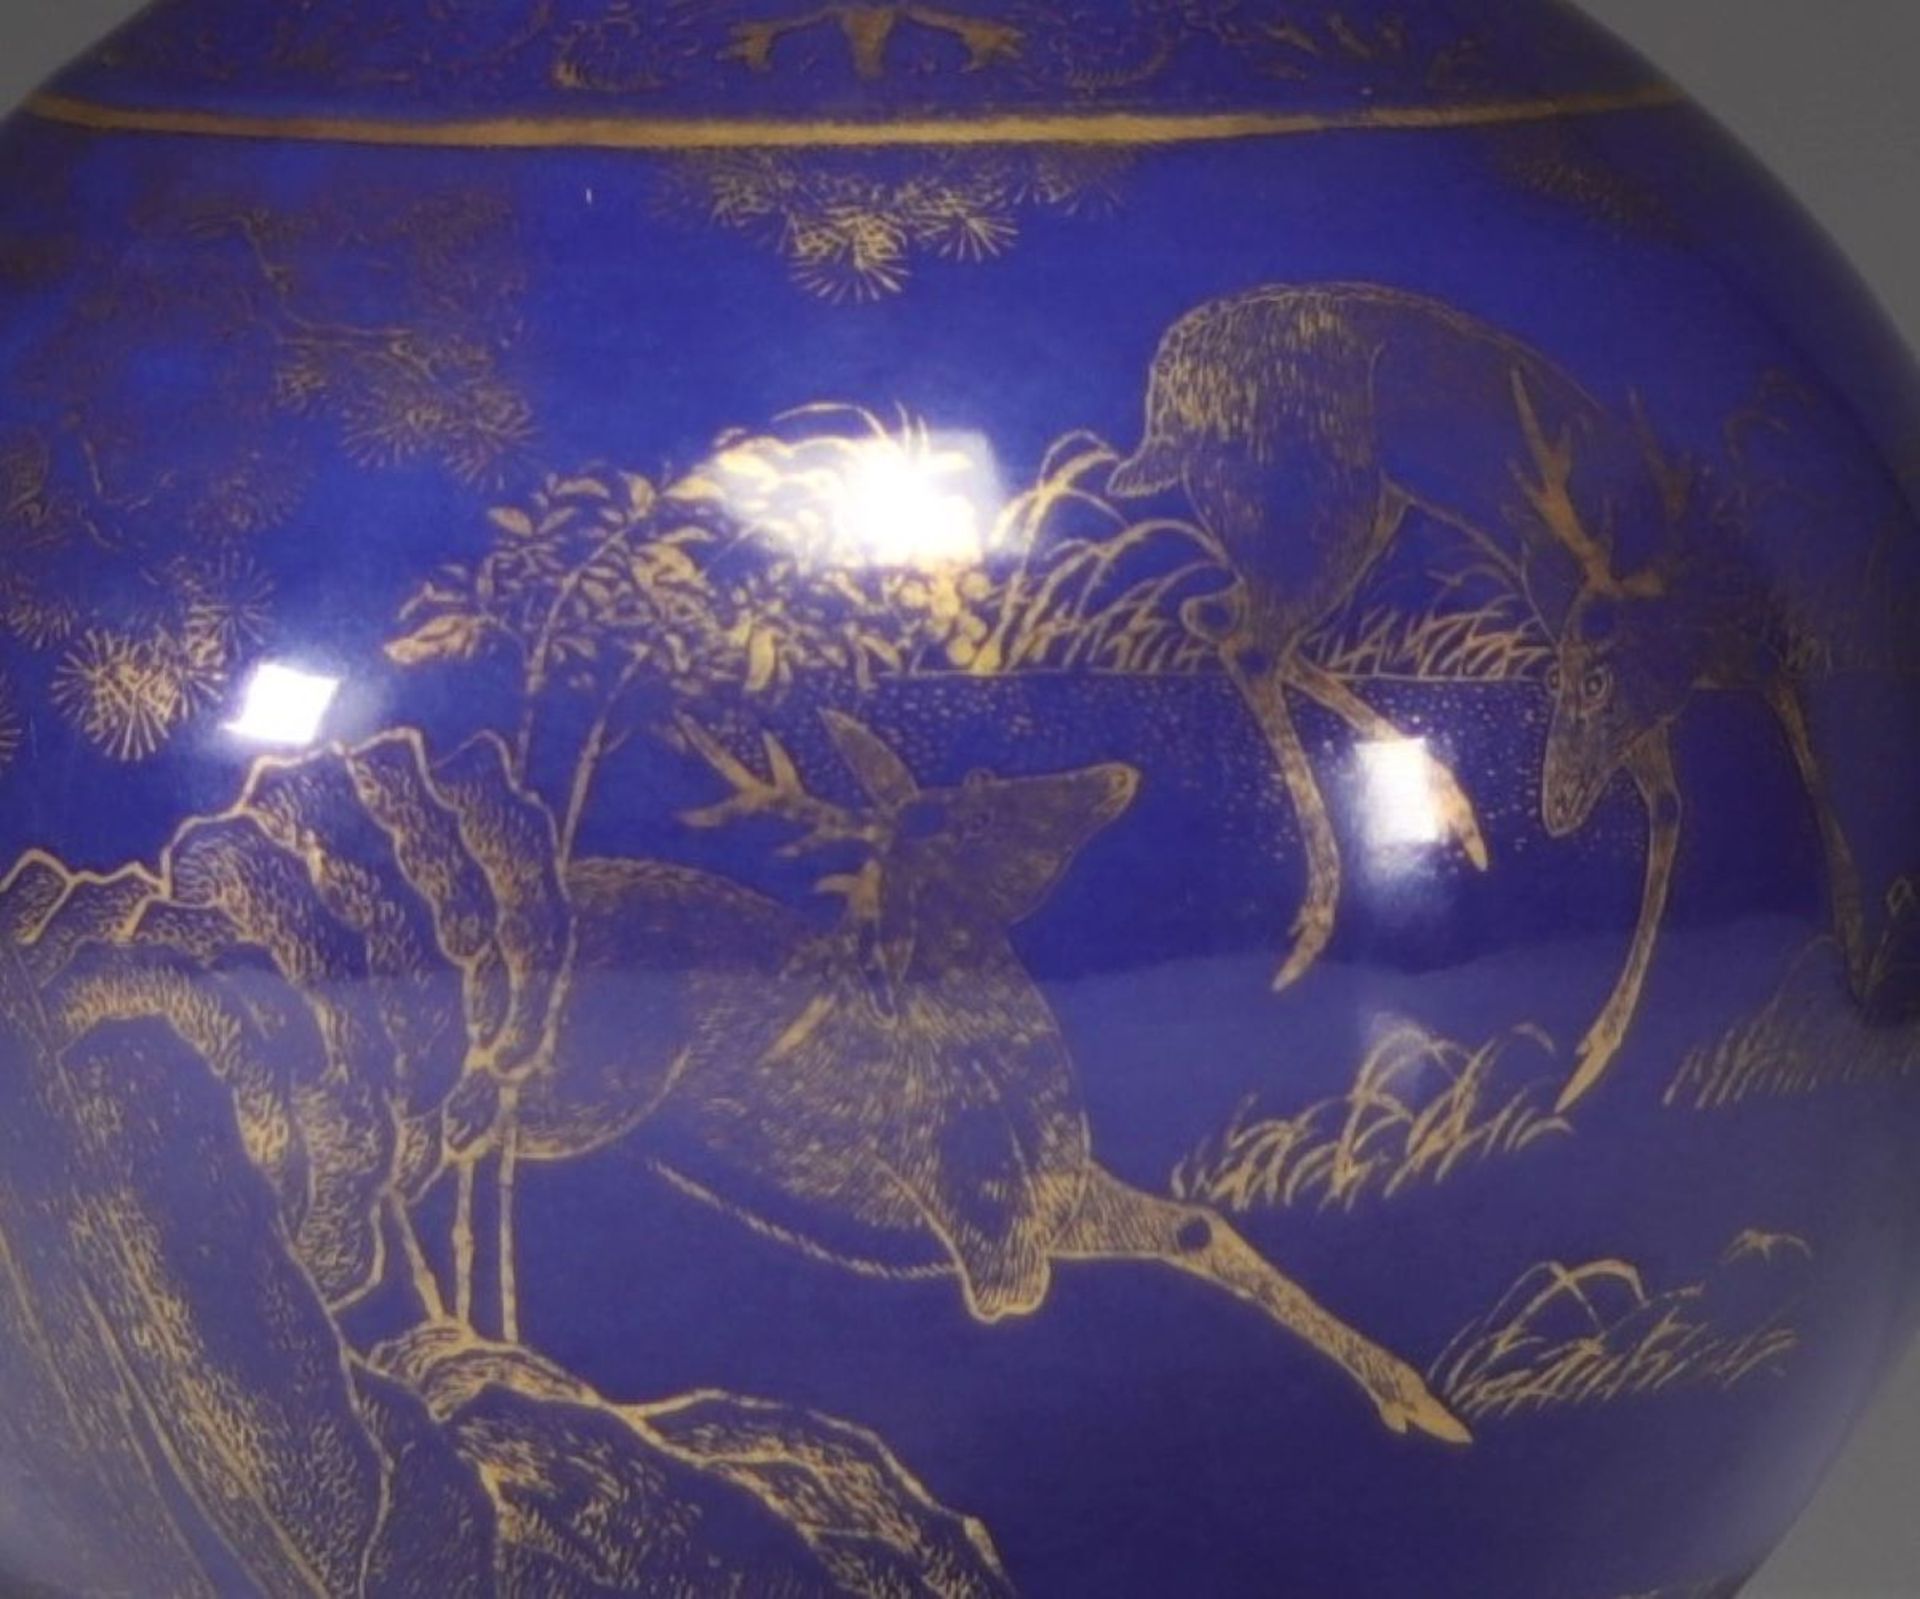 Rare Chinese porcelain vase powdered blue and gilt decoration with deers mark under the piece - Image 7 of 7